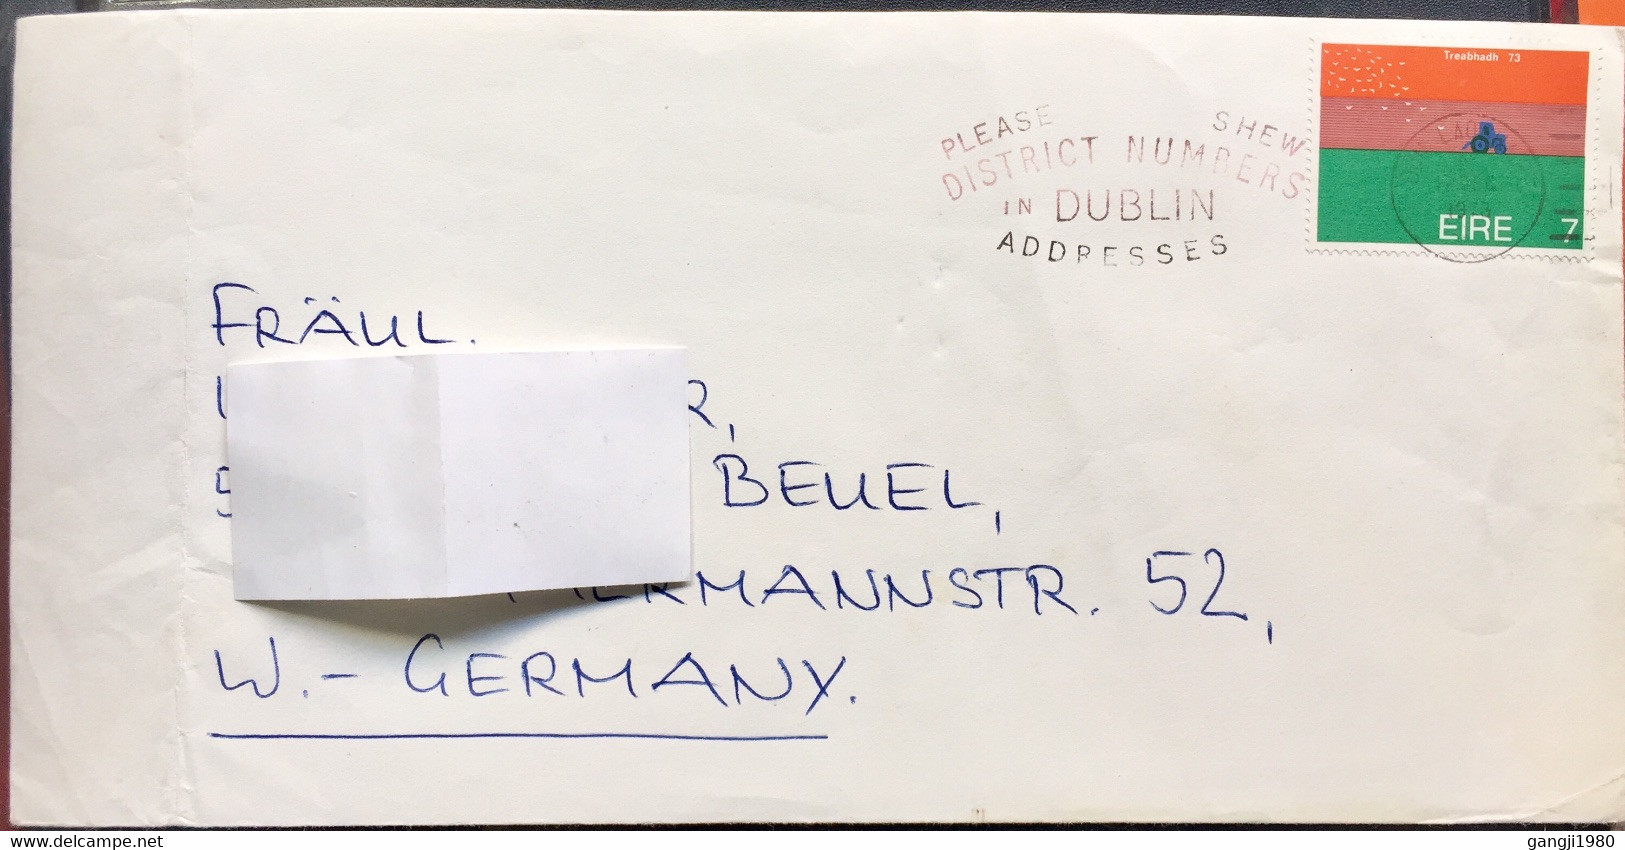 IRELAND 1973,POSTAL STATIONARY COVER, USED TO GERMANY, COLOUR SLOGAN, PLEASE SHEW DISTRICT NUMBER IN DUBLIN ADDRESSES - Entiers Postaux